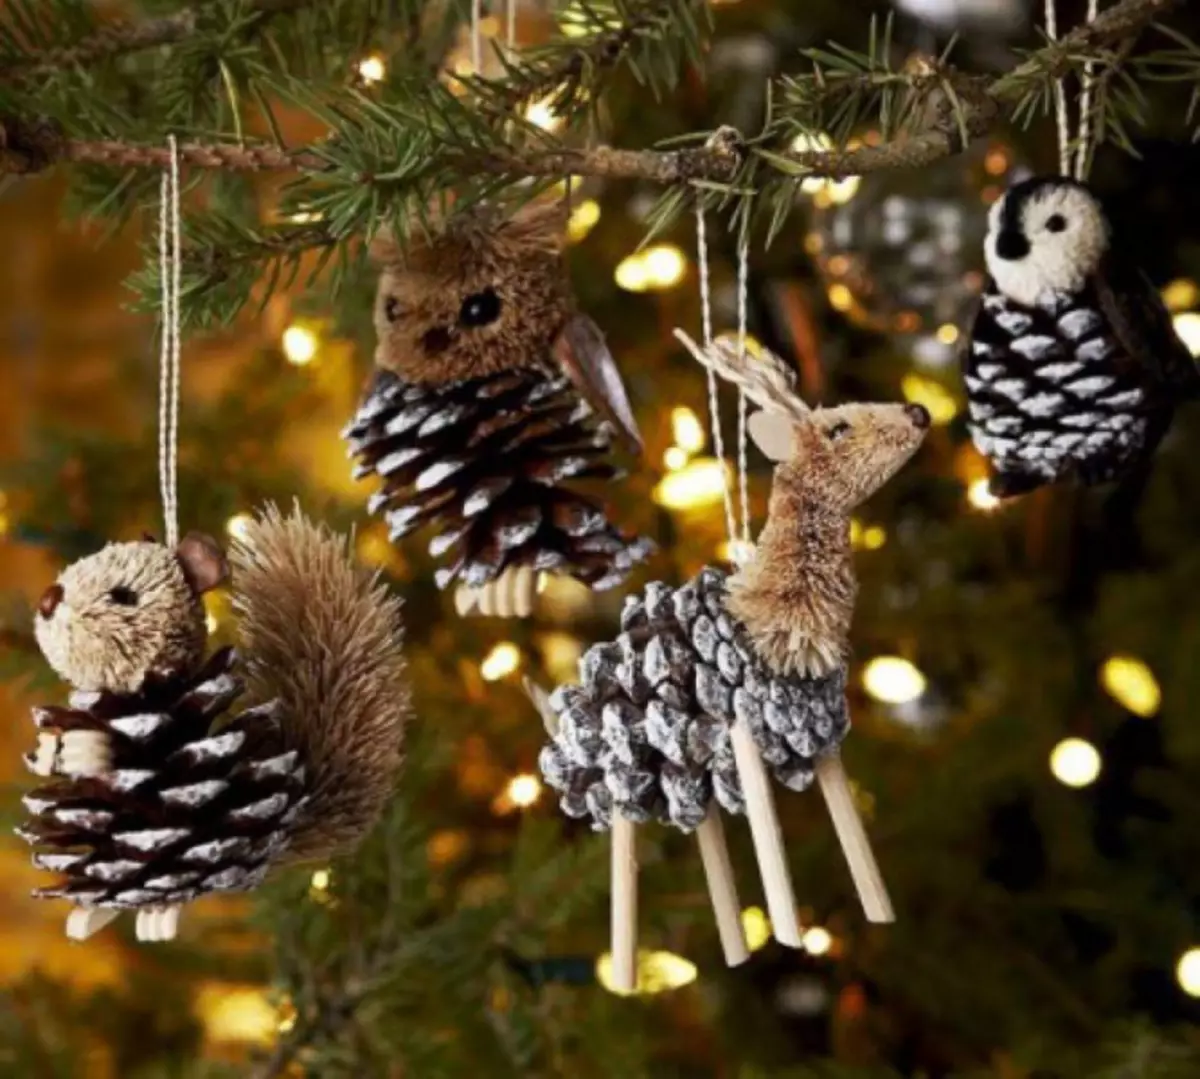 Christmas tree toys do it yourself from girlfriend - 36 ideas